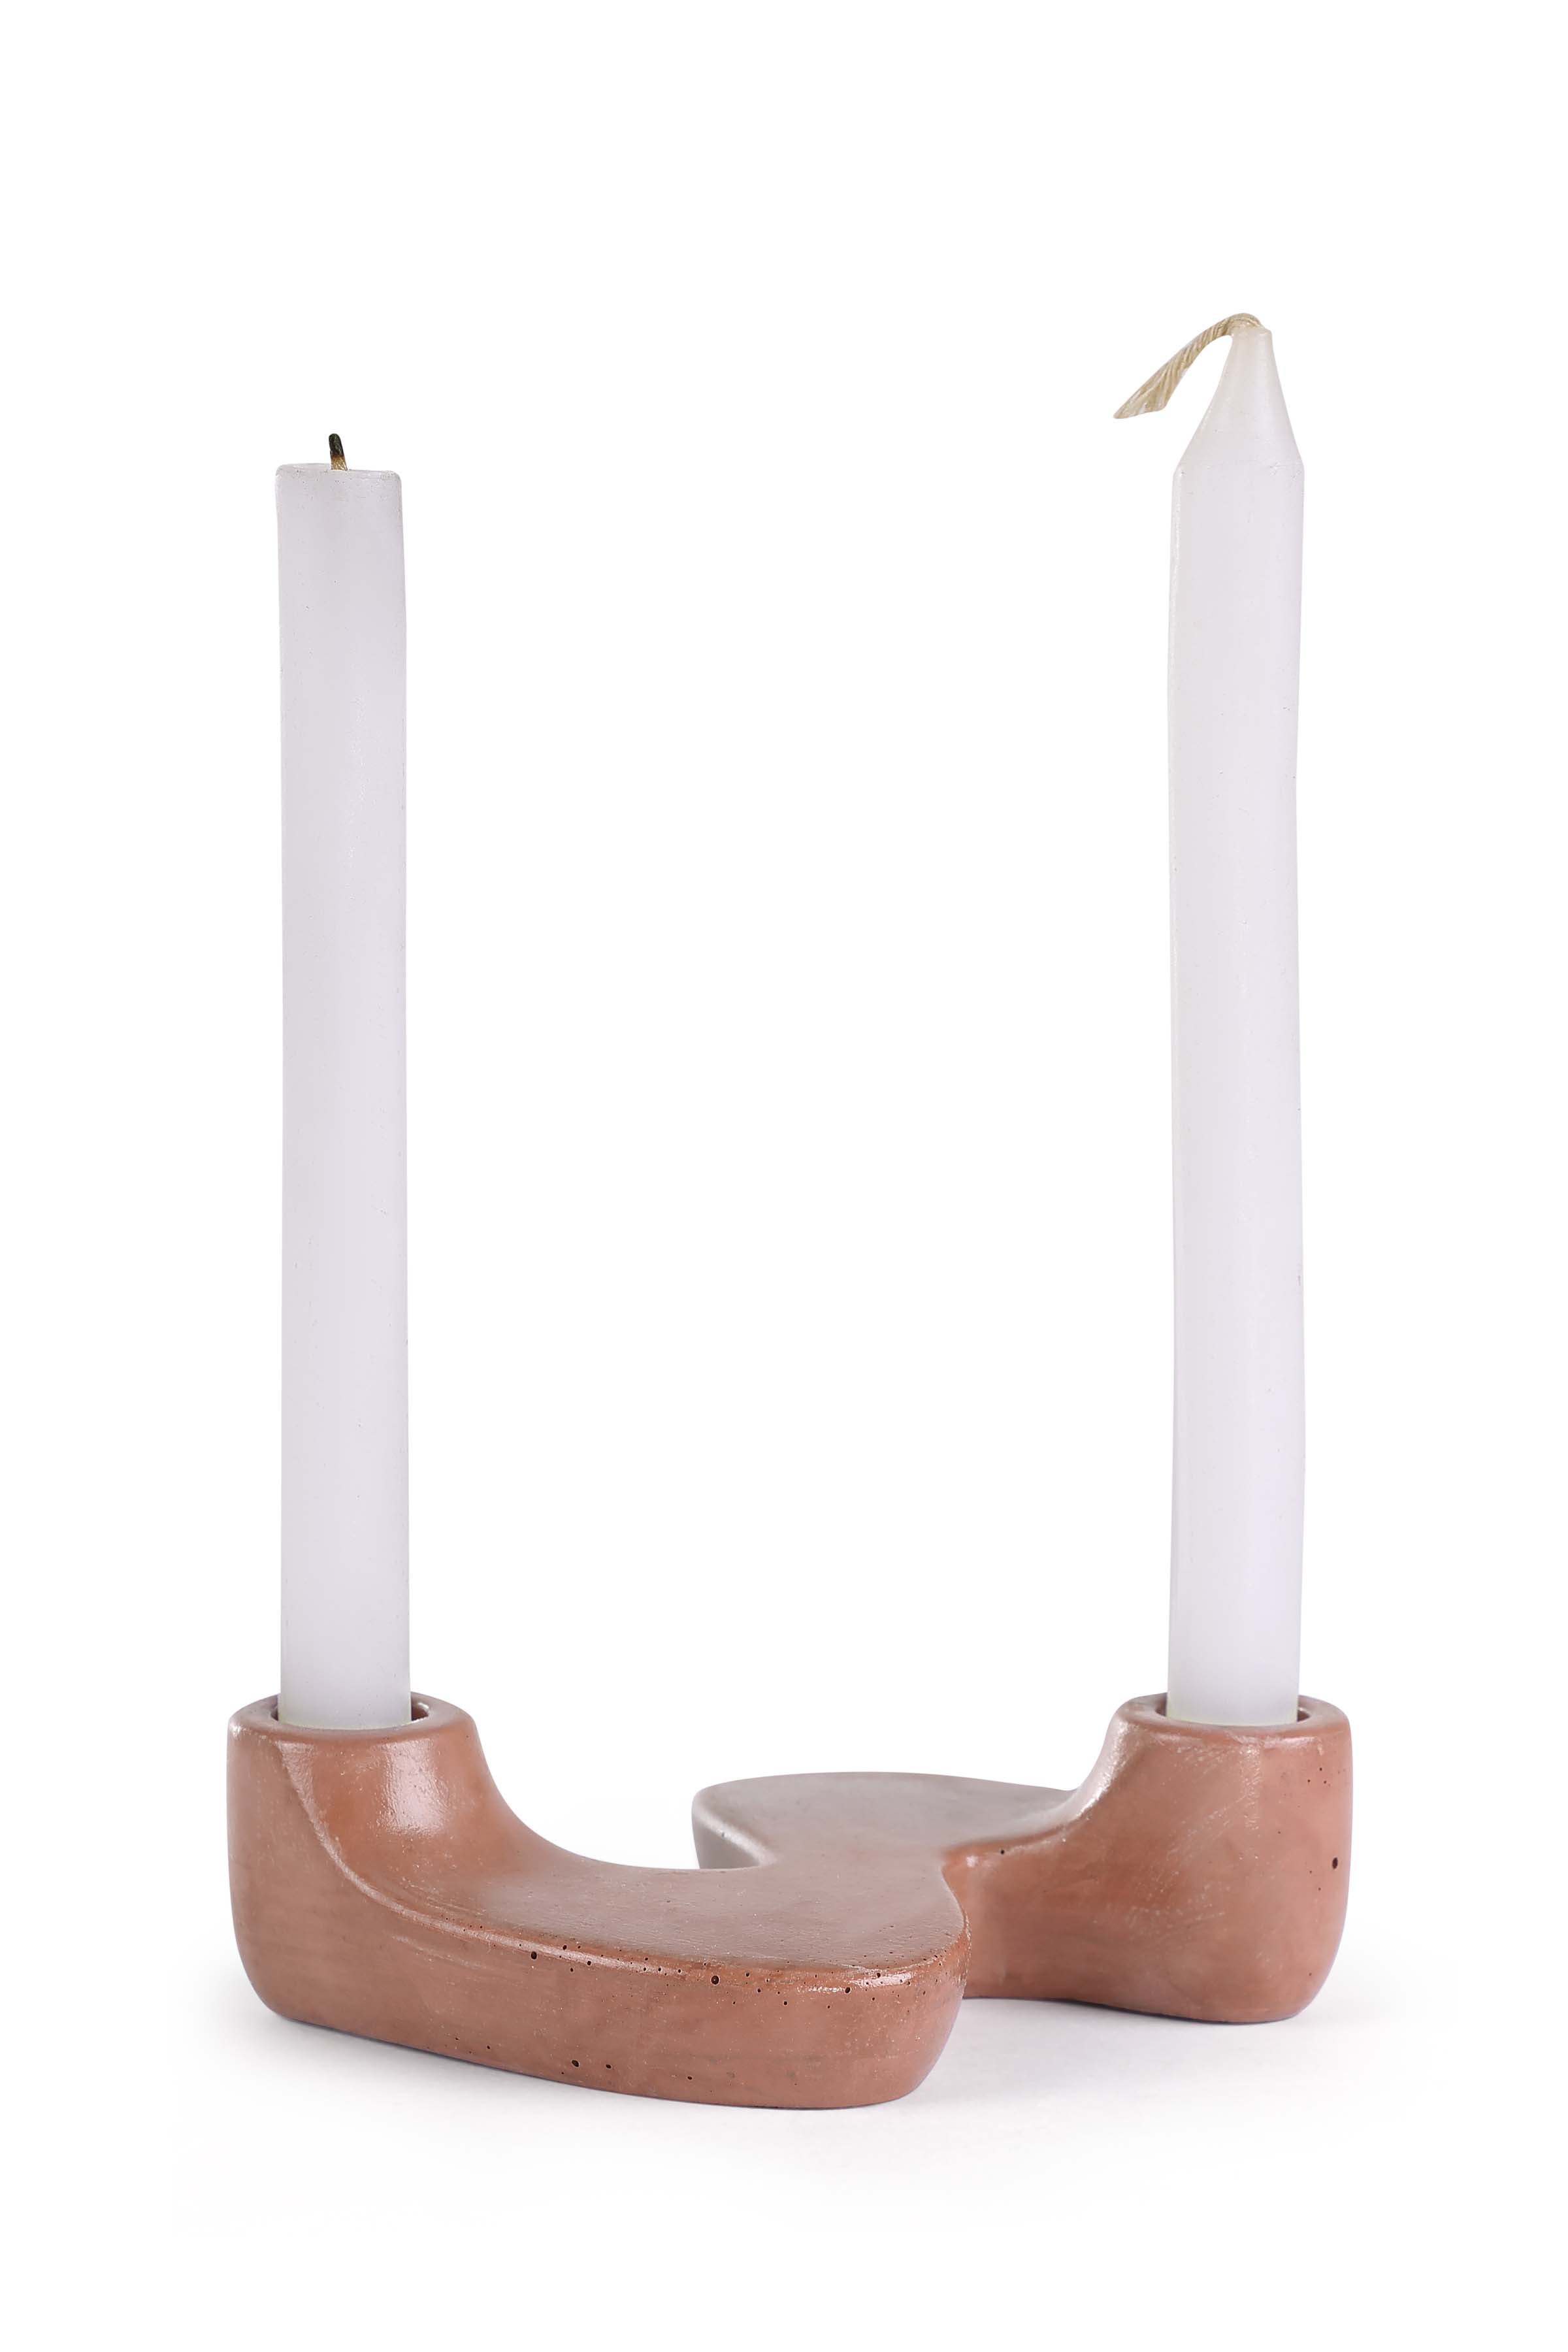 "S" Style Nordic Concrete Candle Holder -Brown (Set of 2)